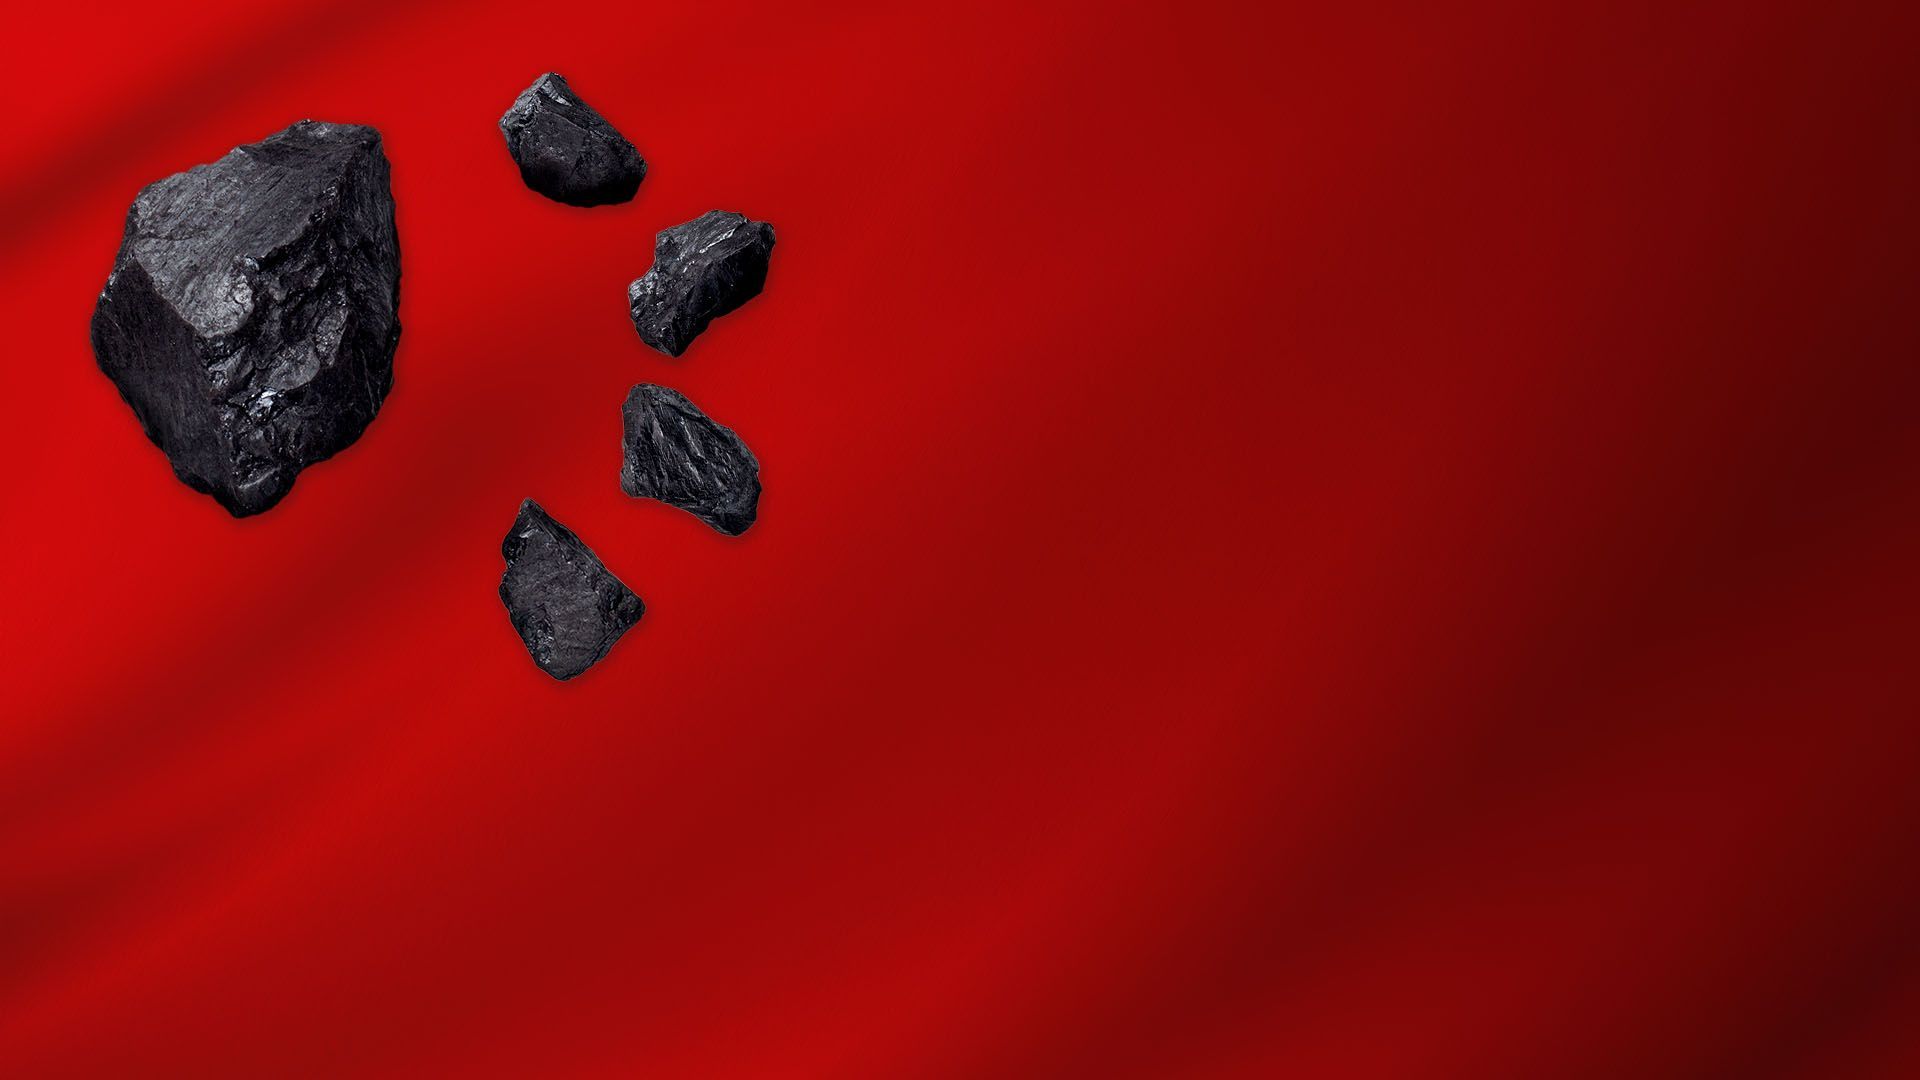 Illustration of China's flag with pieces of coal replacing the stars.